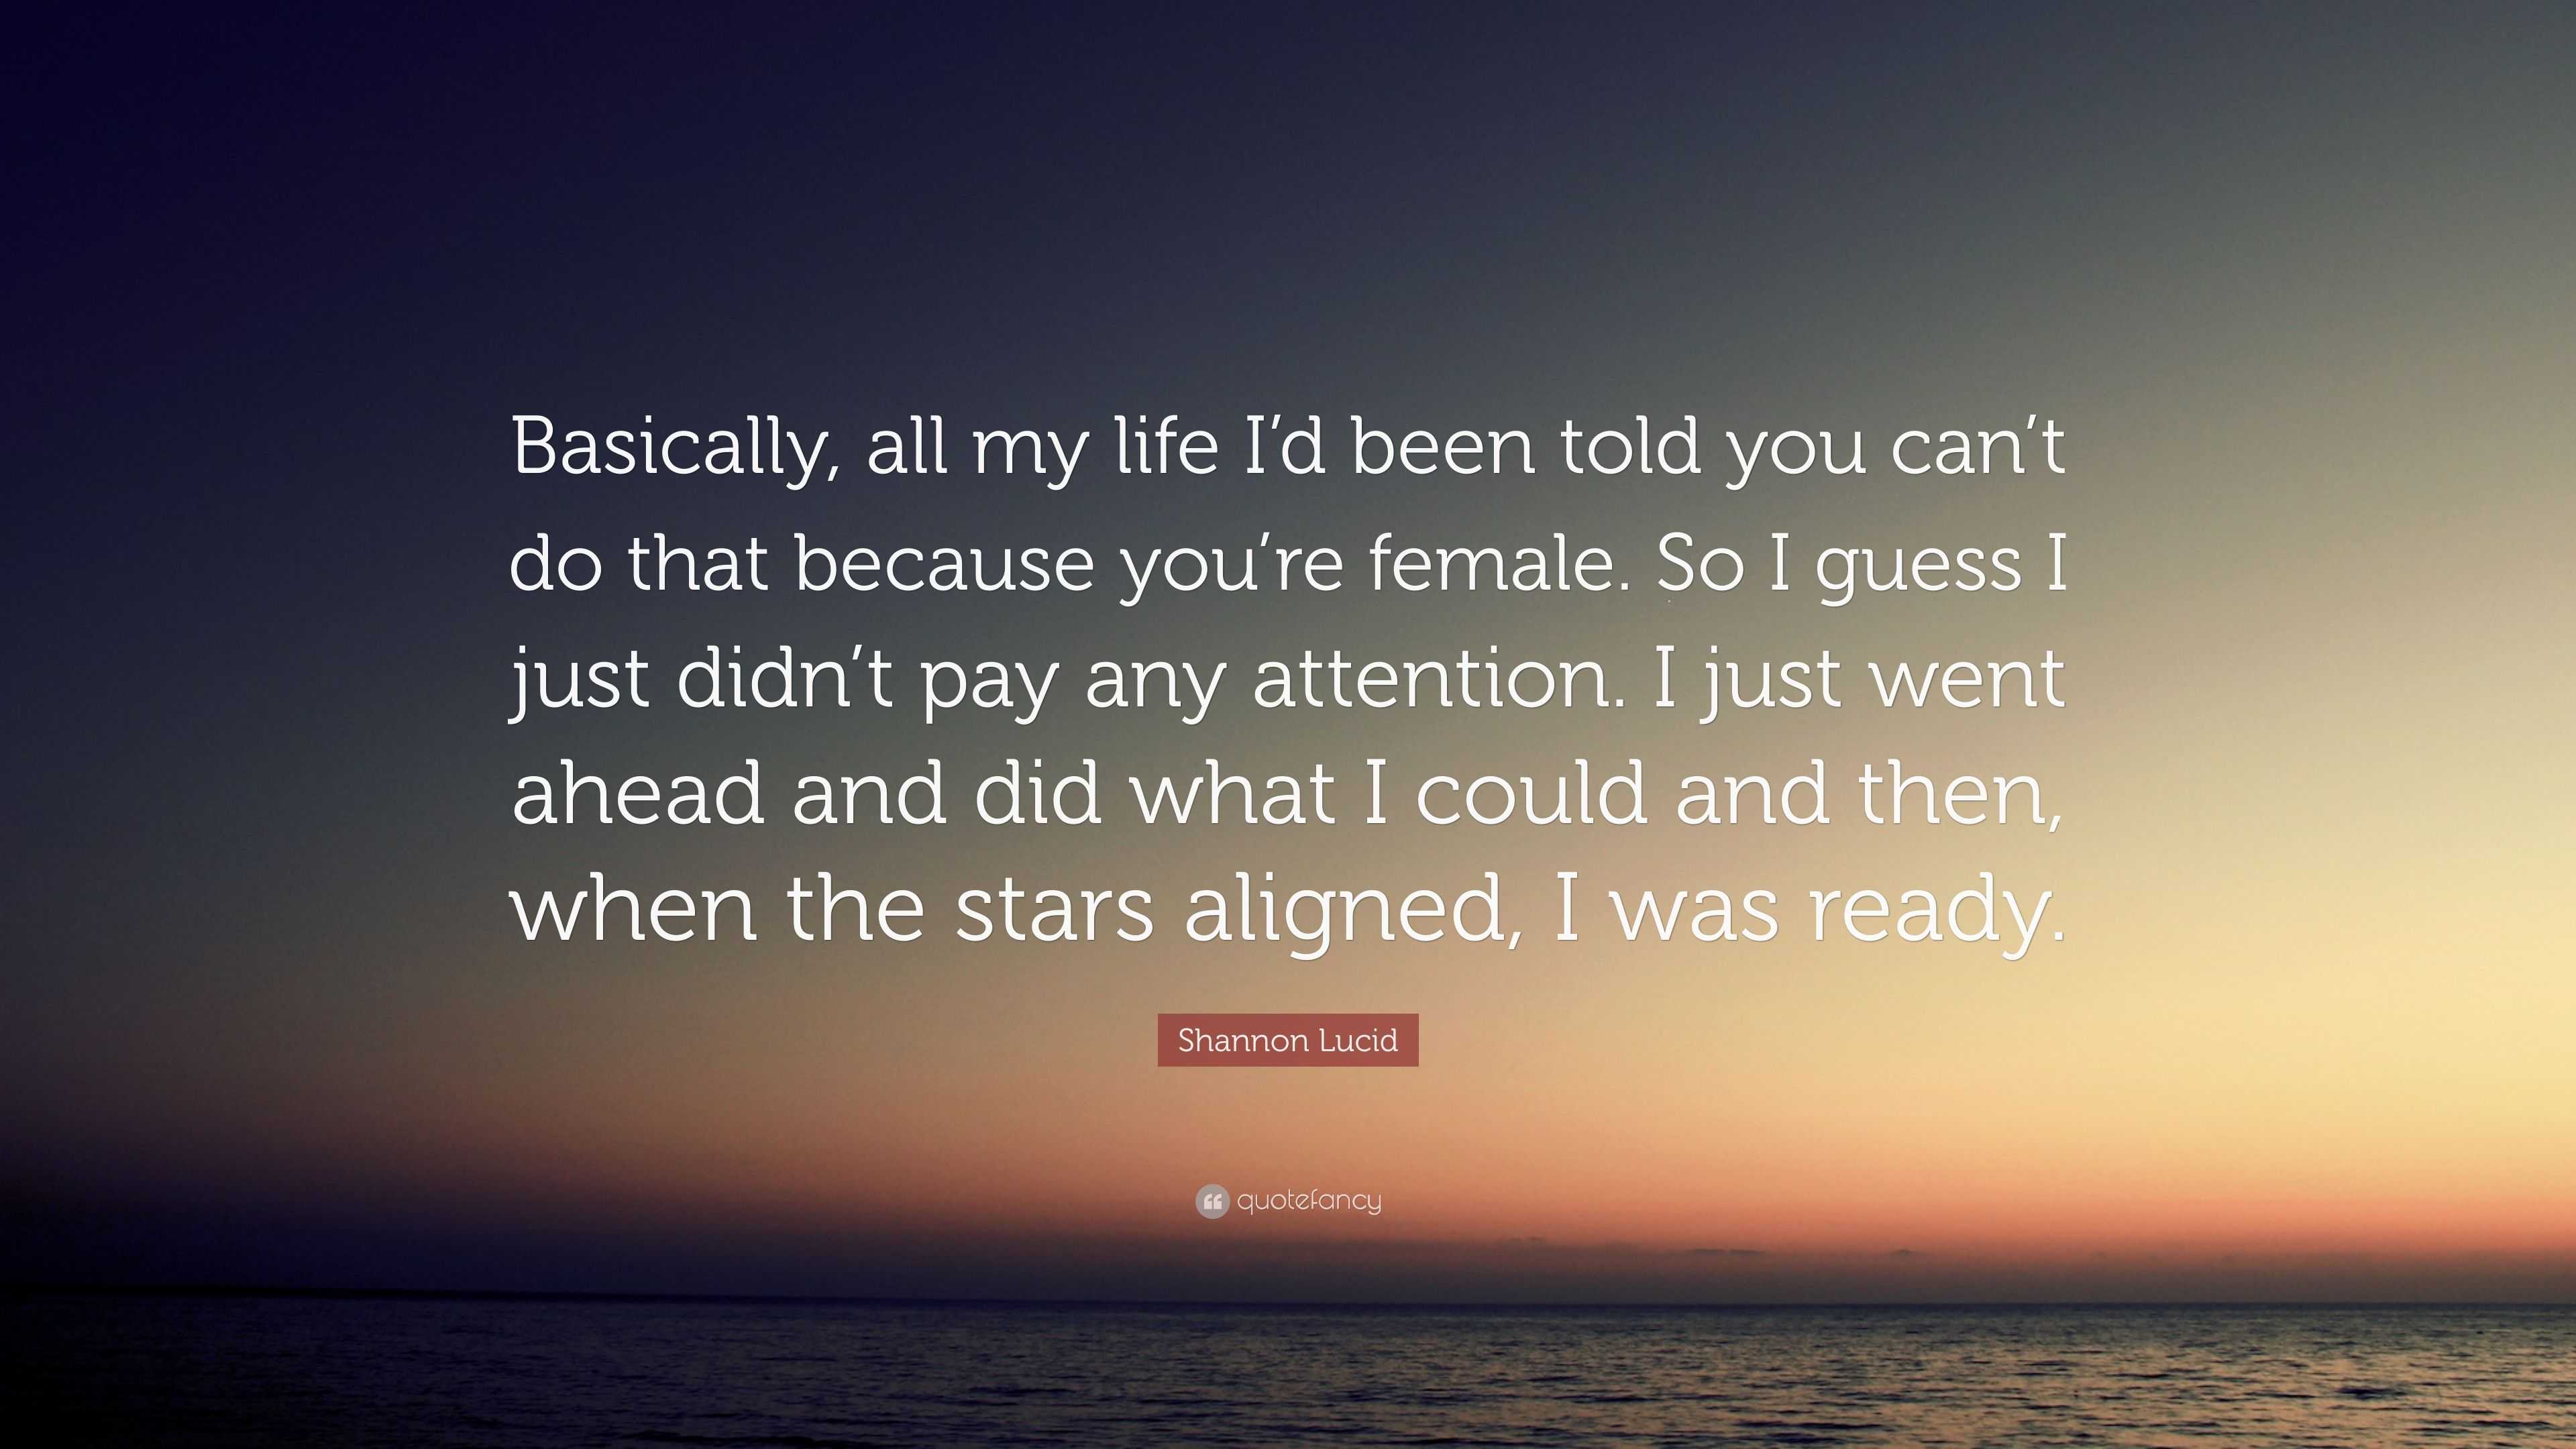 Shannon Lucid Quote: “Basically, all my life I’d been told you can’t do ...